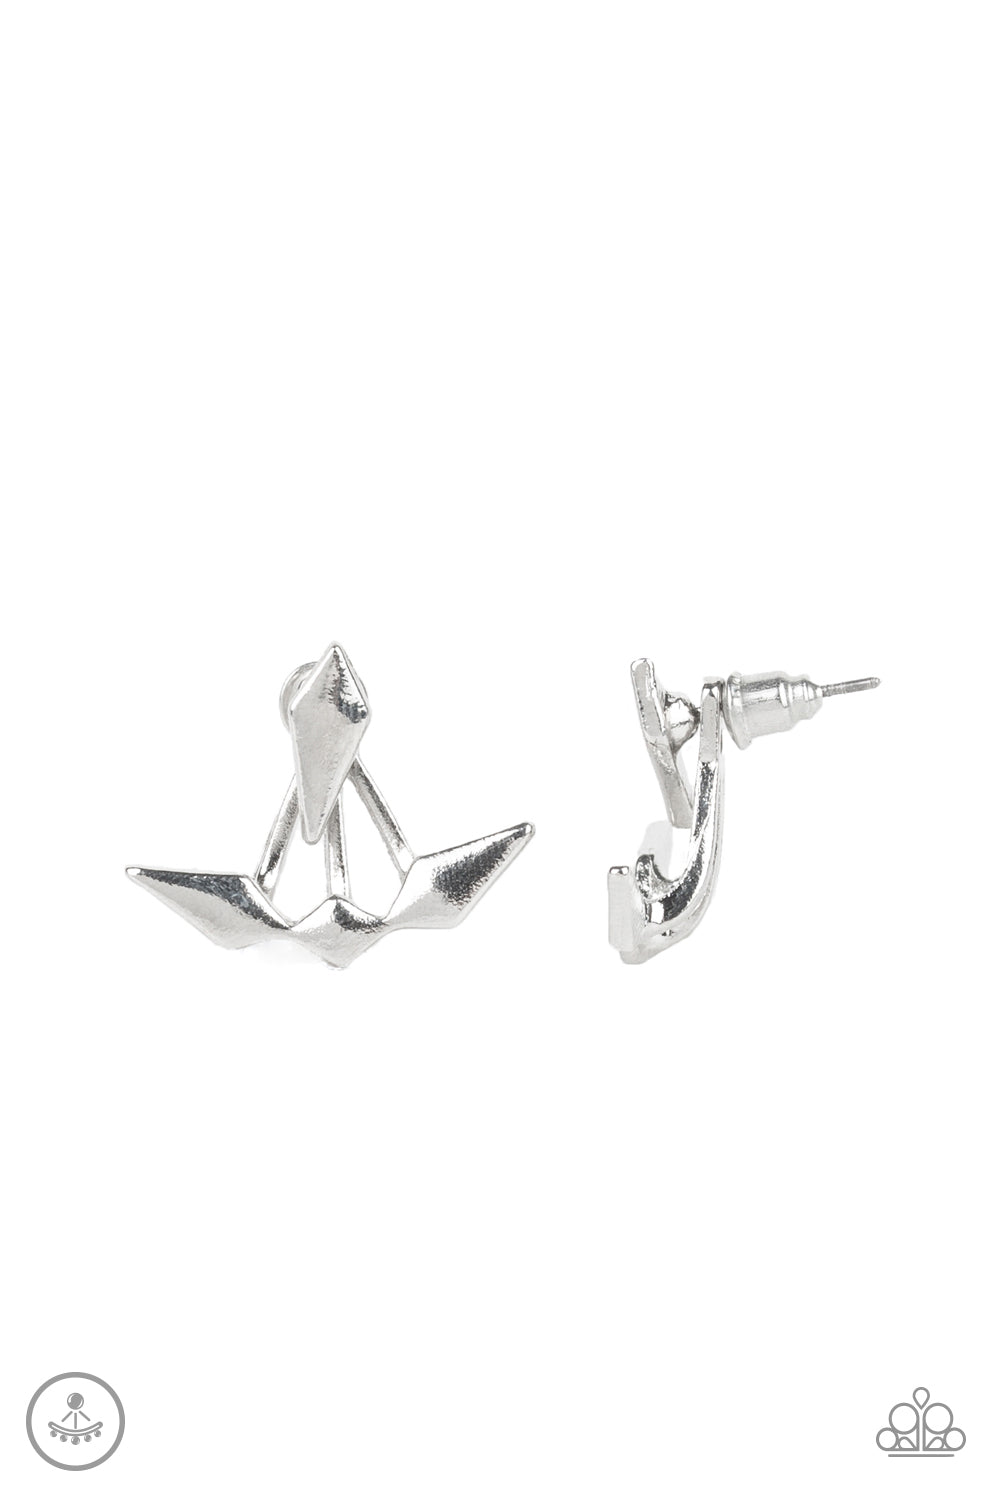 Metal Origami - Silver Earrings - Paparazzi Accessories